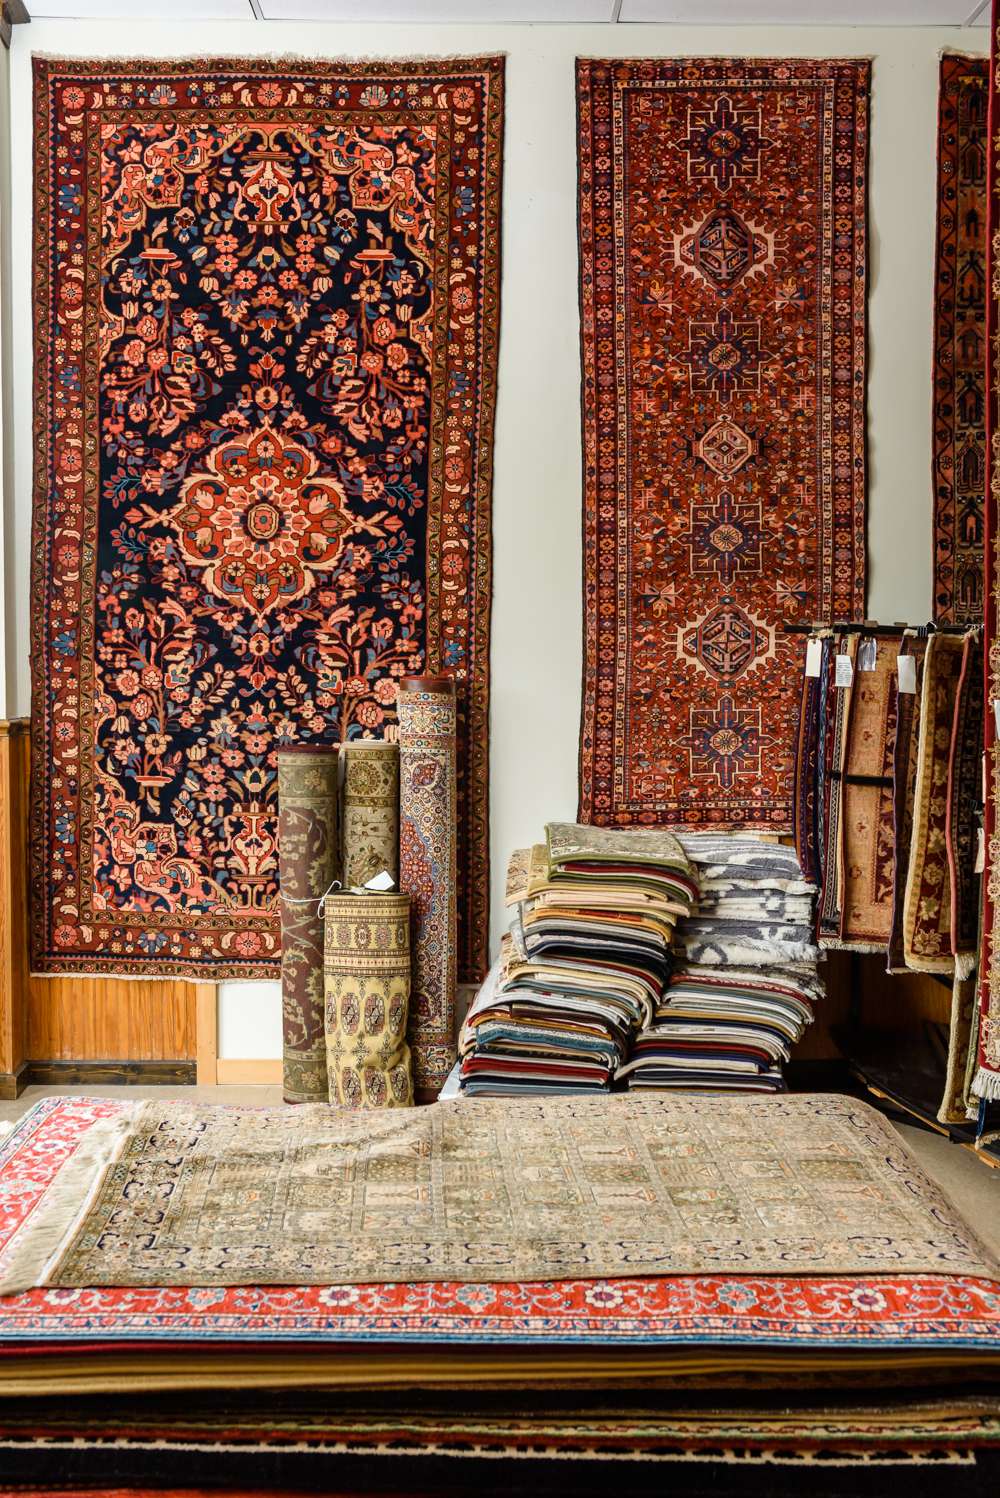 Arefs Oriental Rugs | 1325 Baltimore Pike, Bel Air, MD 21014, USA | Phone: (410) 879-2270